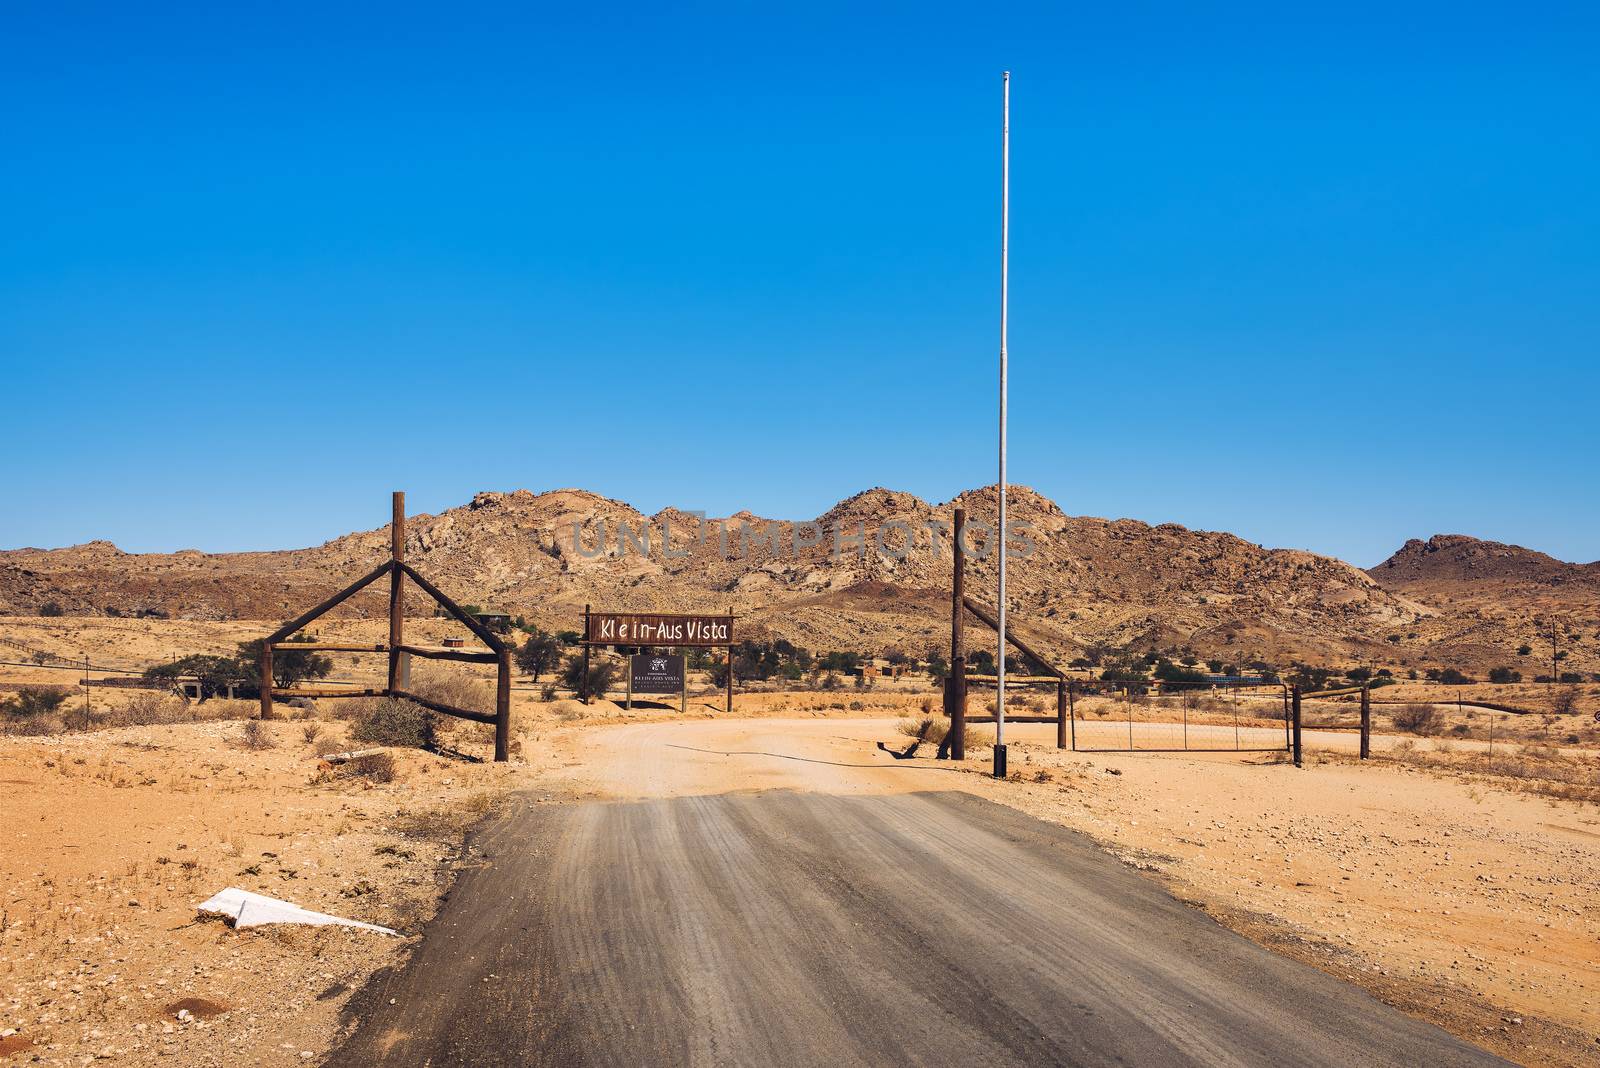 Entry gate to the Klein-Aus Vista lodge and restaurant in Namibia by nickfox